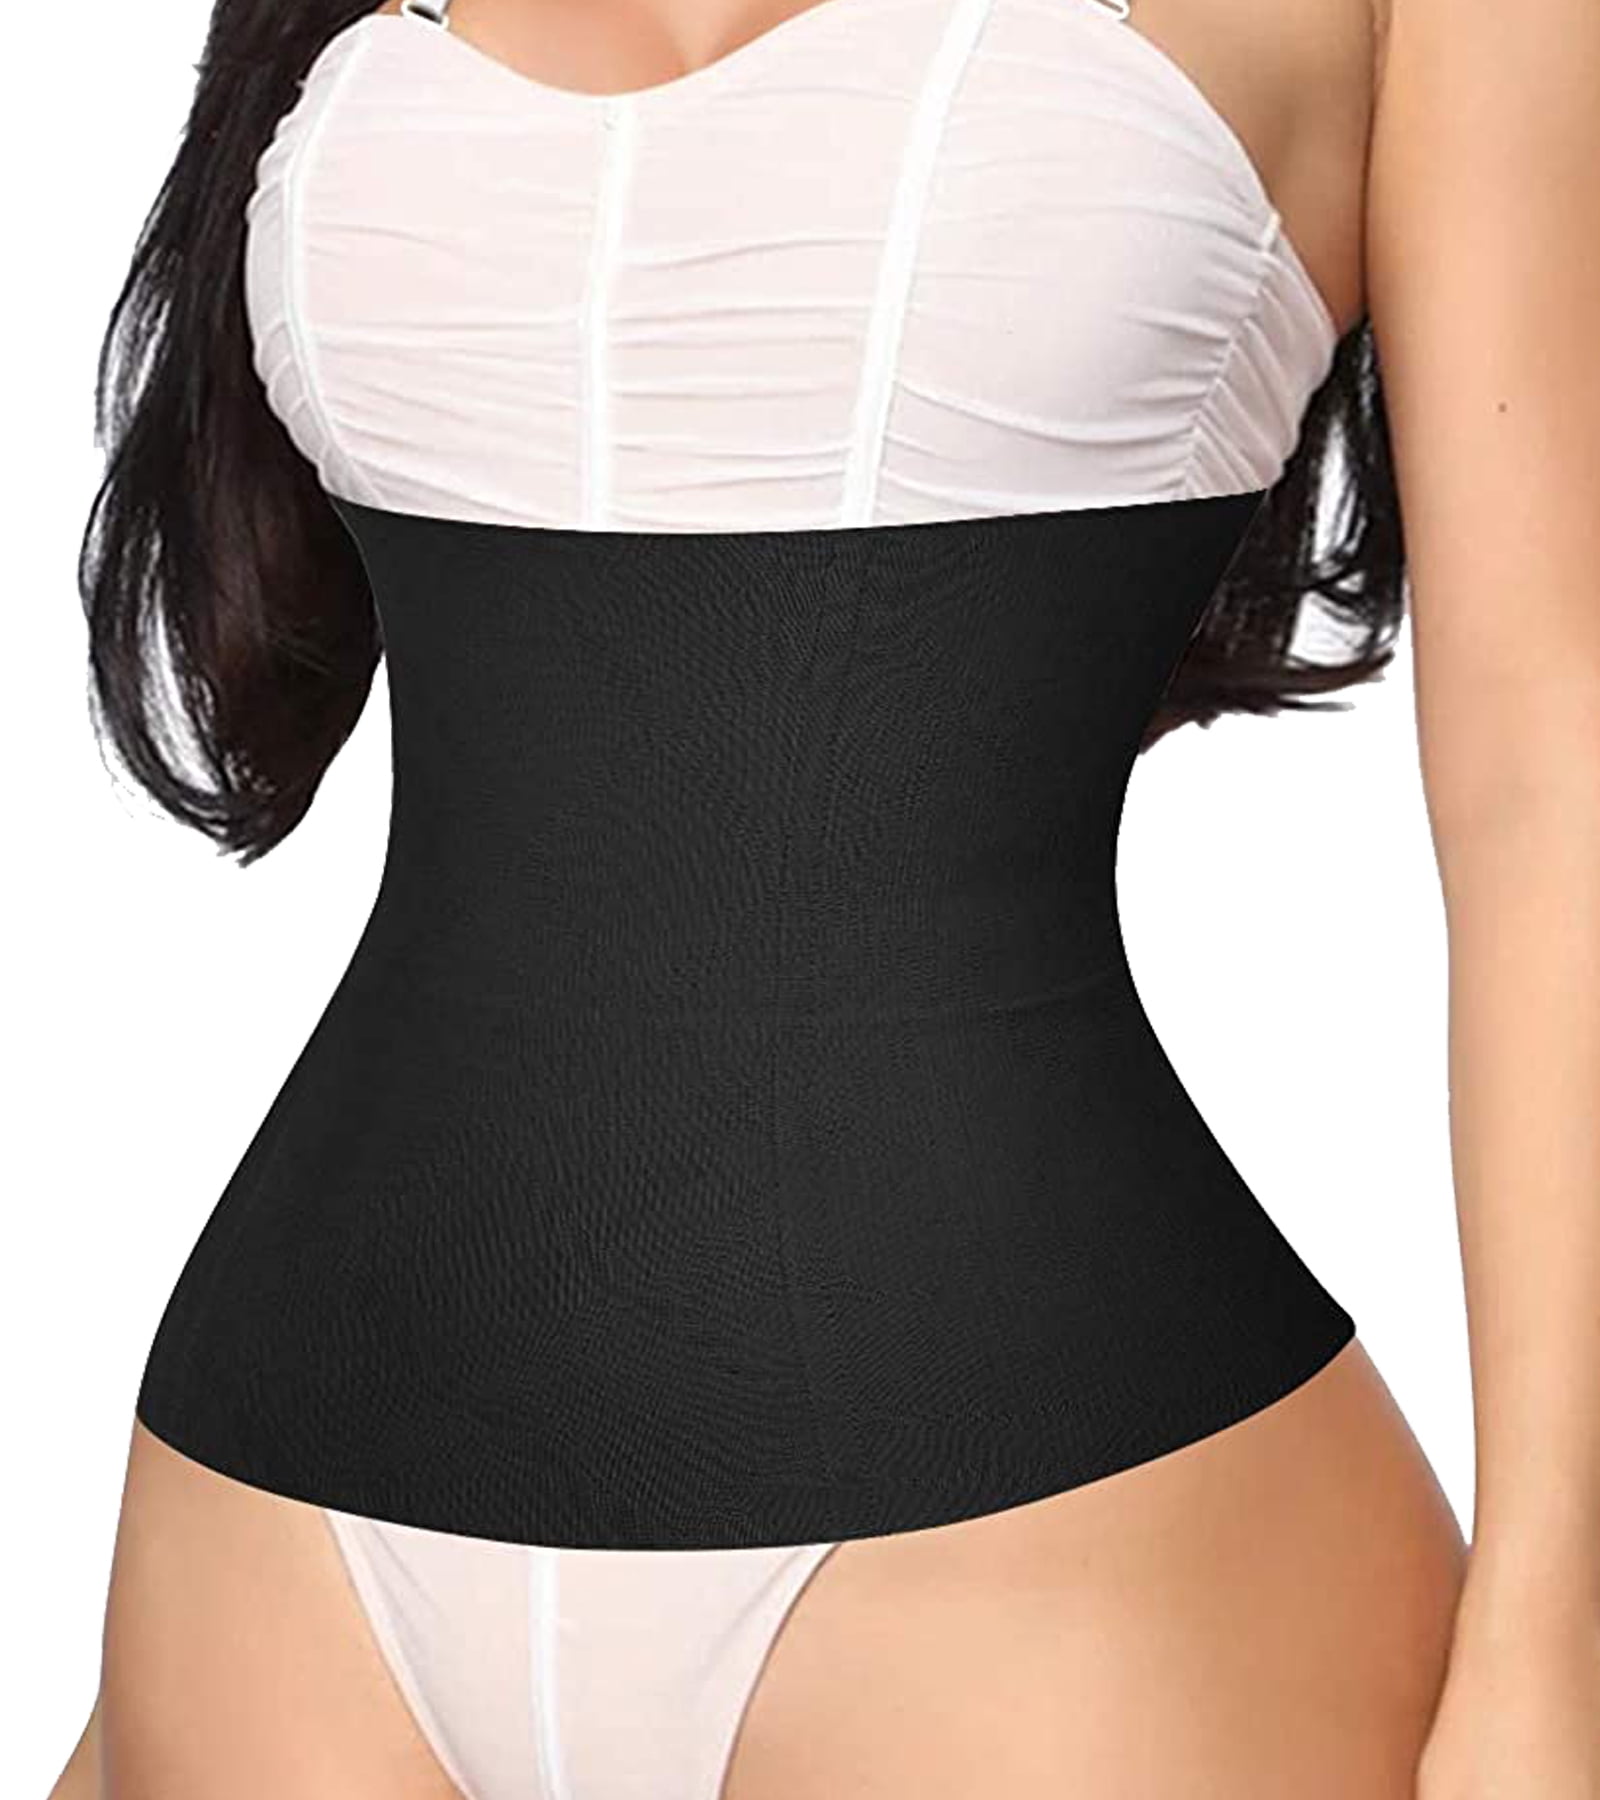 Loday Women 2 in 1 Postpartum Belly Band Tummy Control Shapewear Seamless  Maternity Recovery Belt for Tighten Loose Skin(Black, M） 